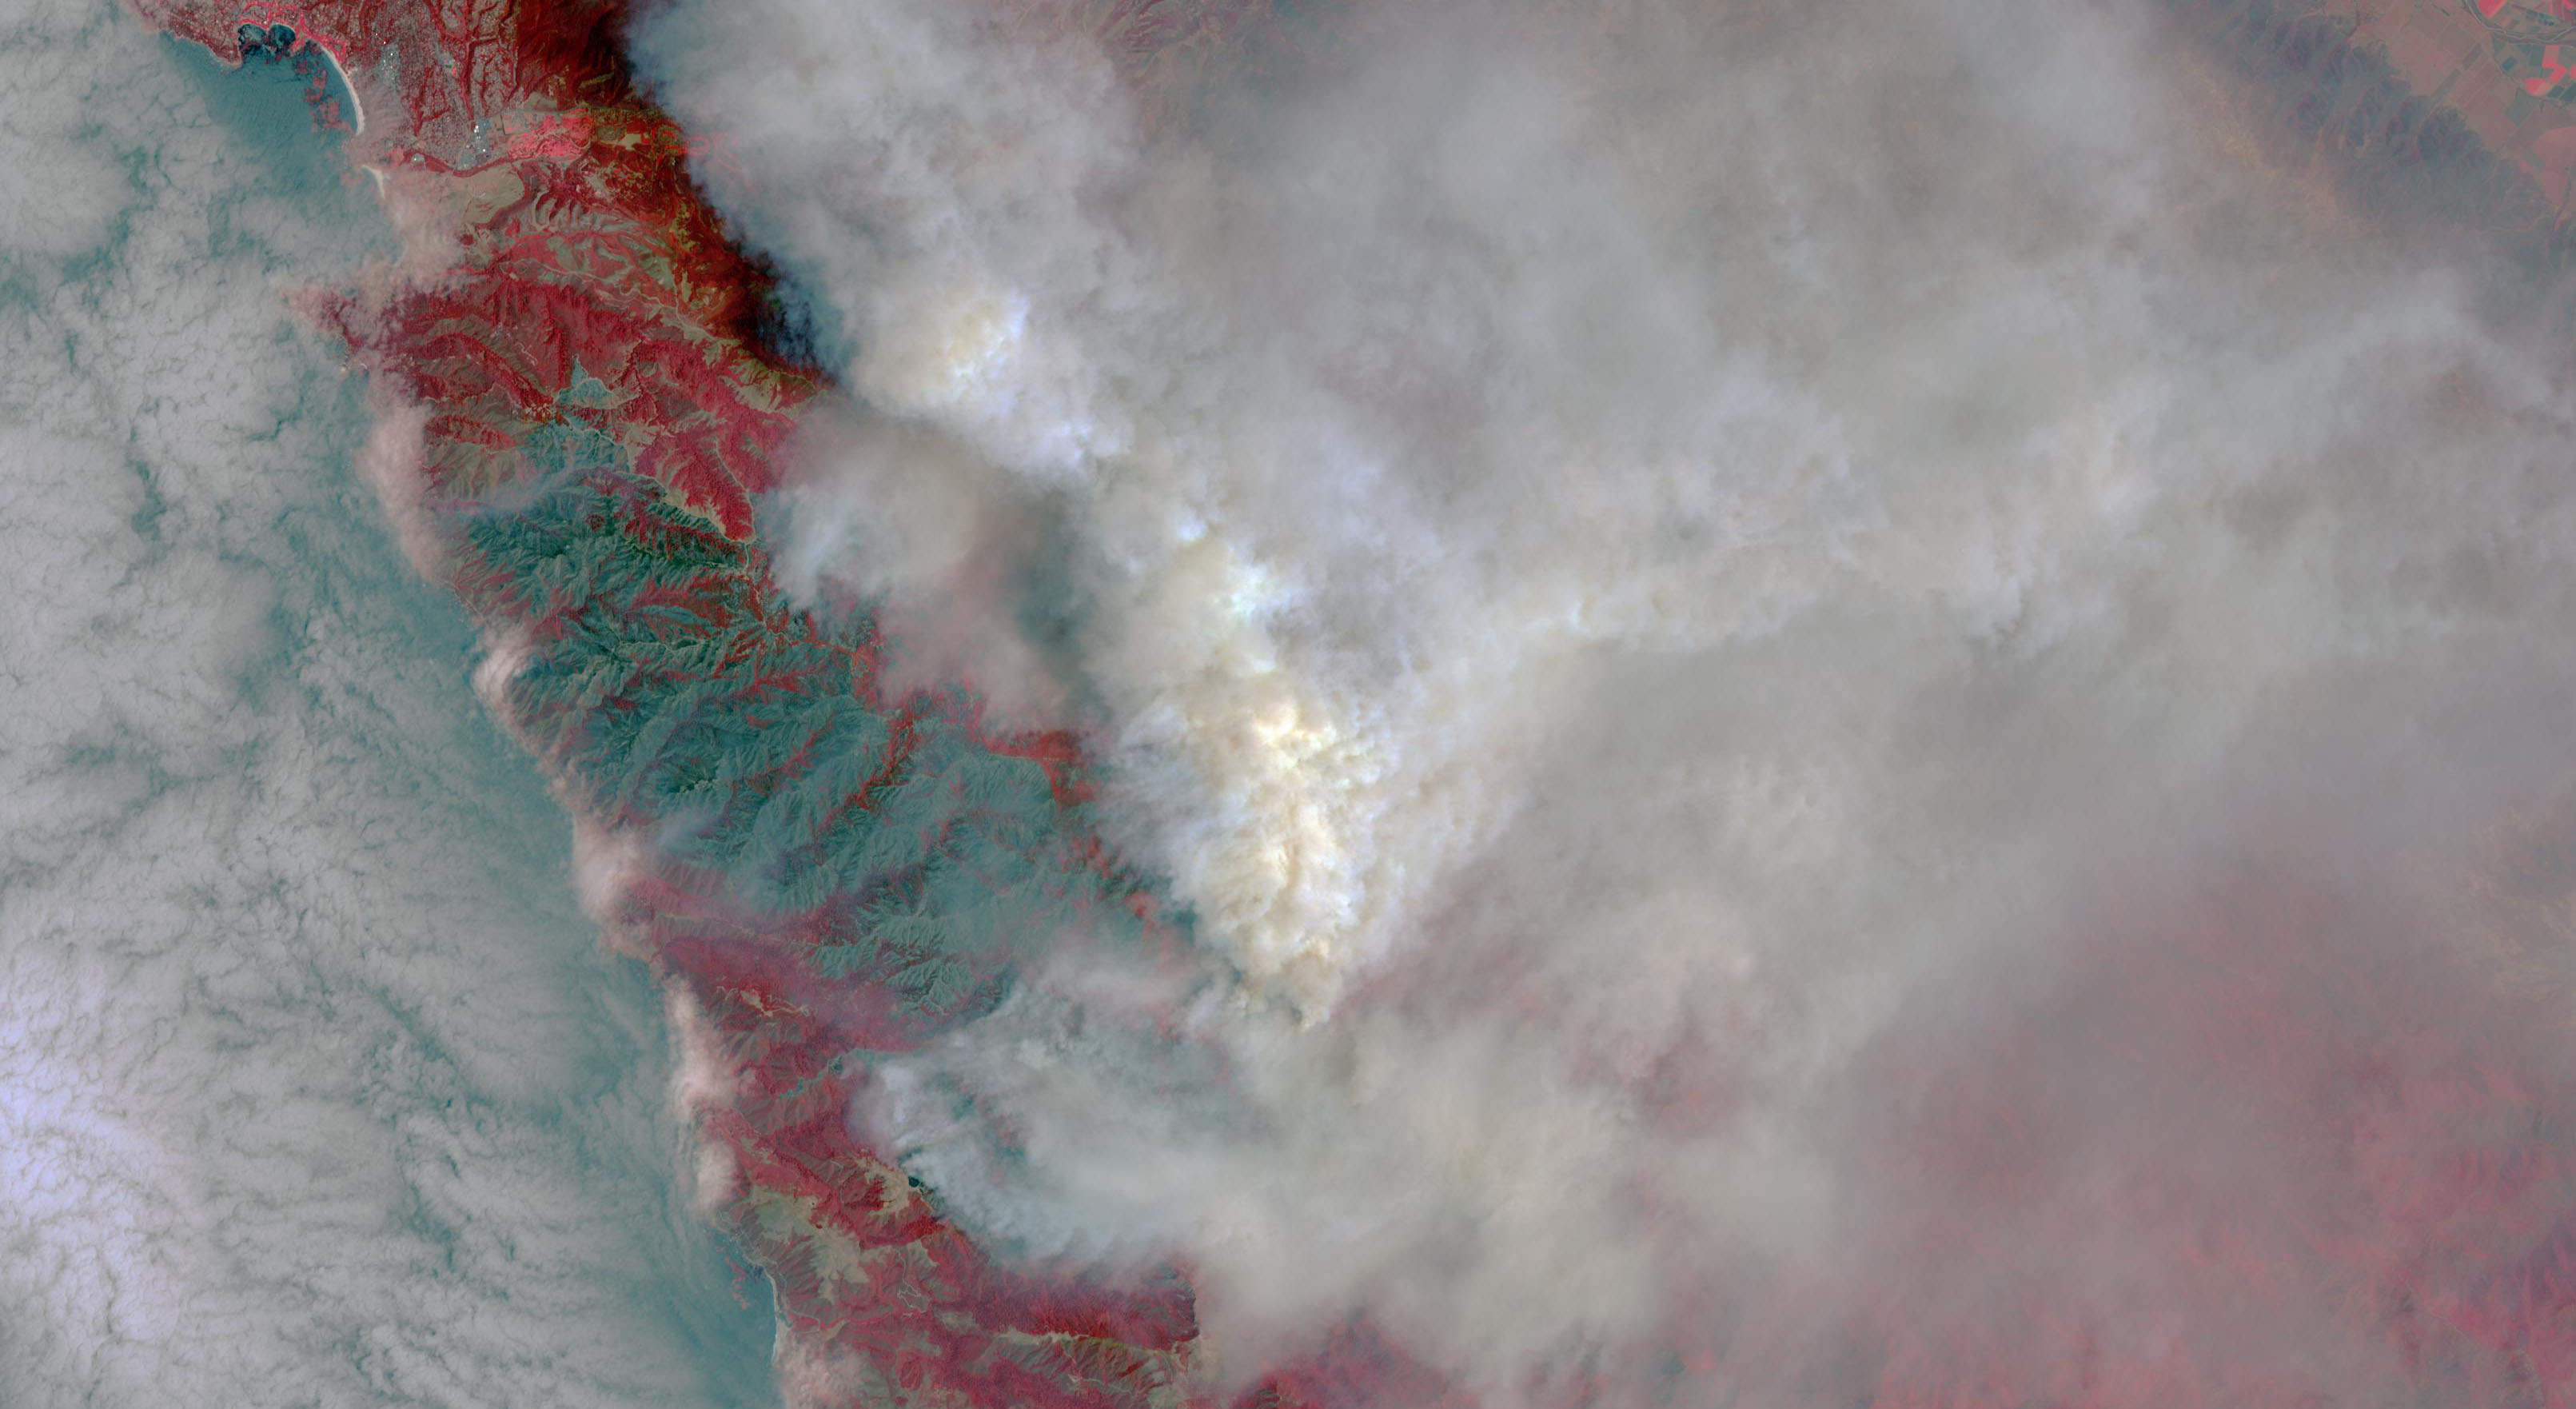 An image of the Soberanes fire, in northern California near Big Sur